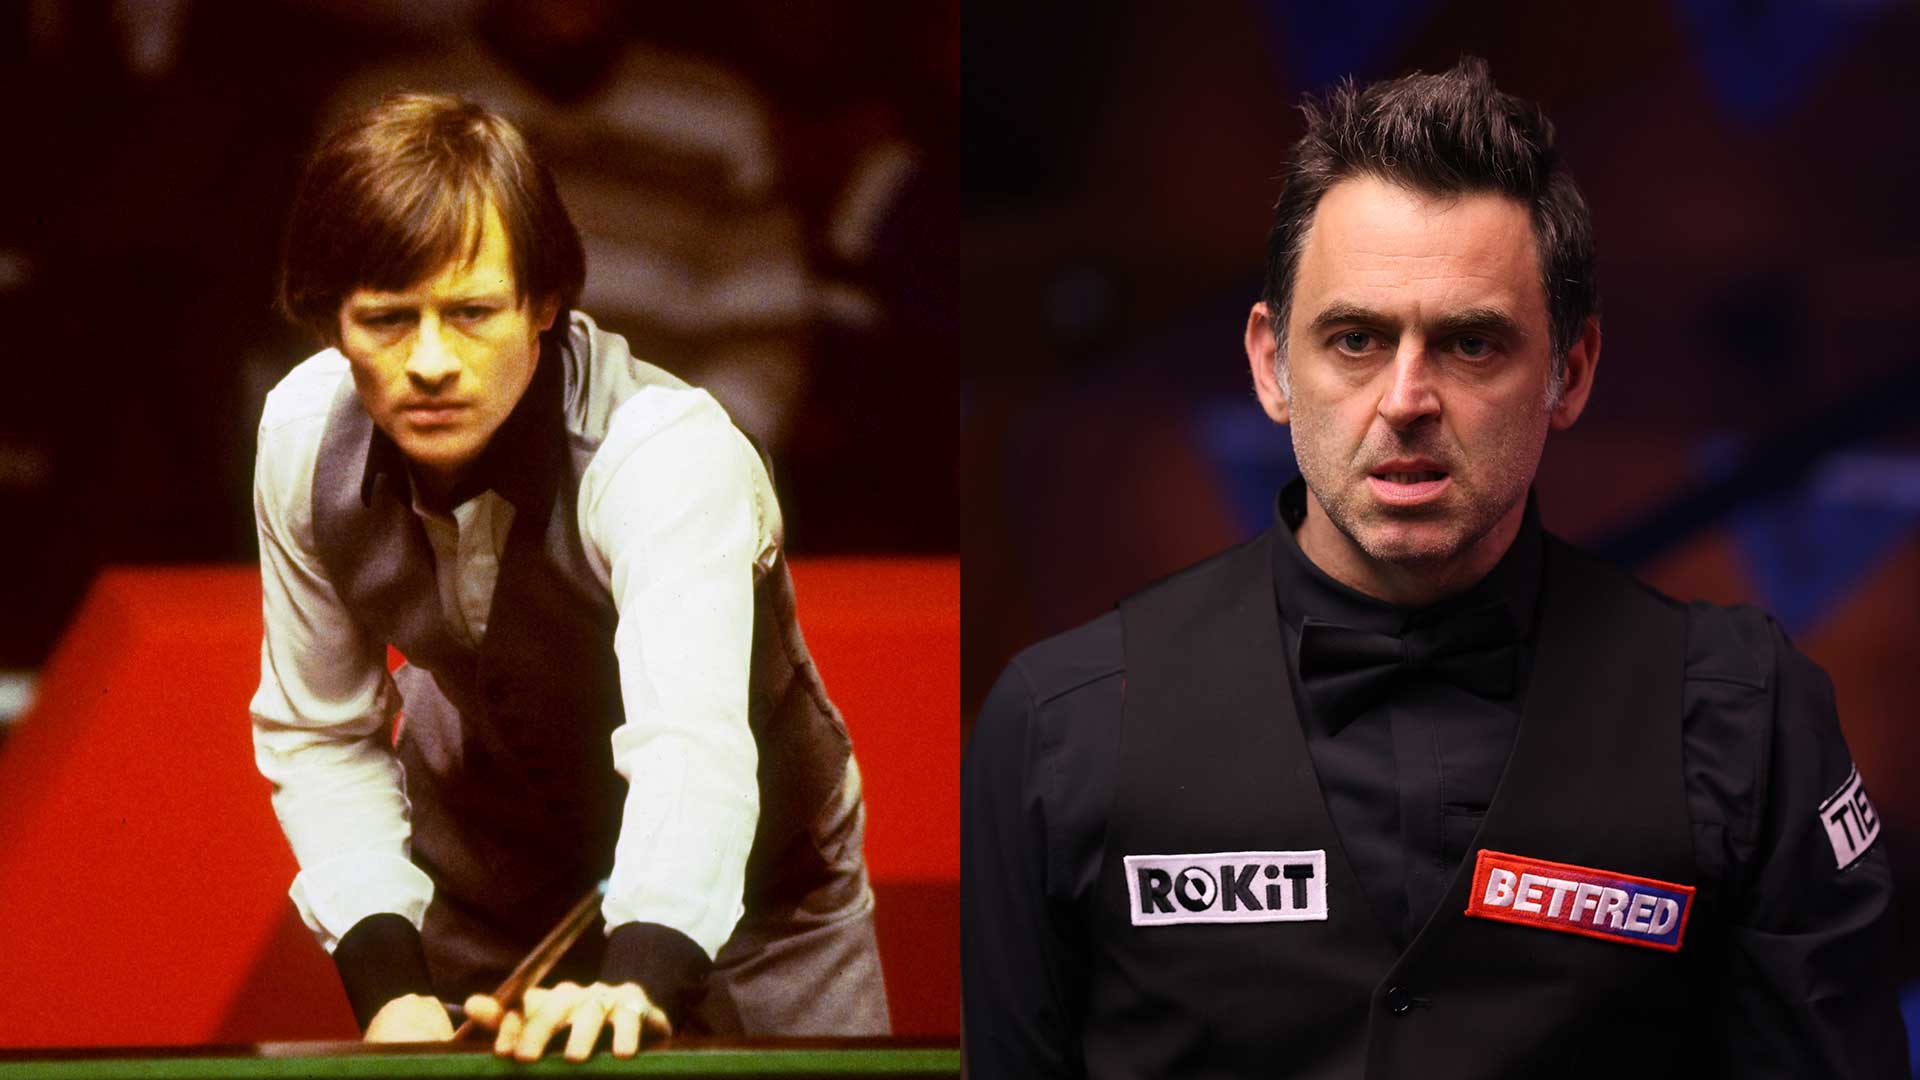 Is Ronnie OSullivan really bad for snooker? Shaun Murphy compares the Rocket to Alex Higgins in response to Hossein Vafaeis controversial remarks